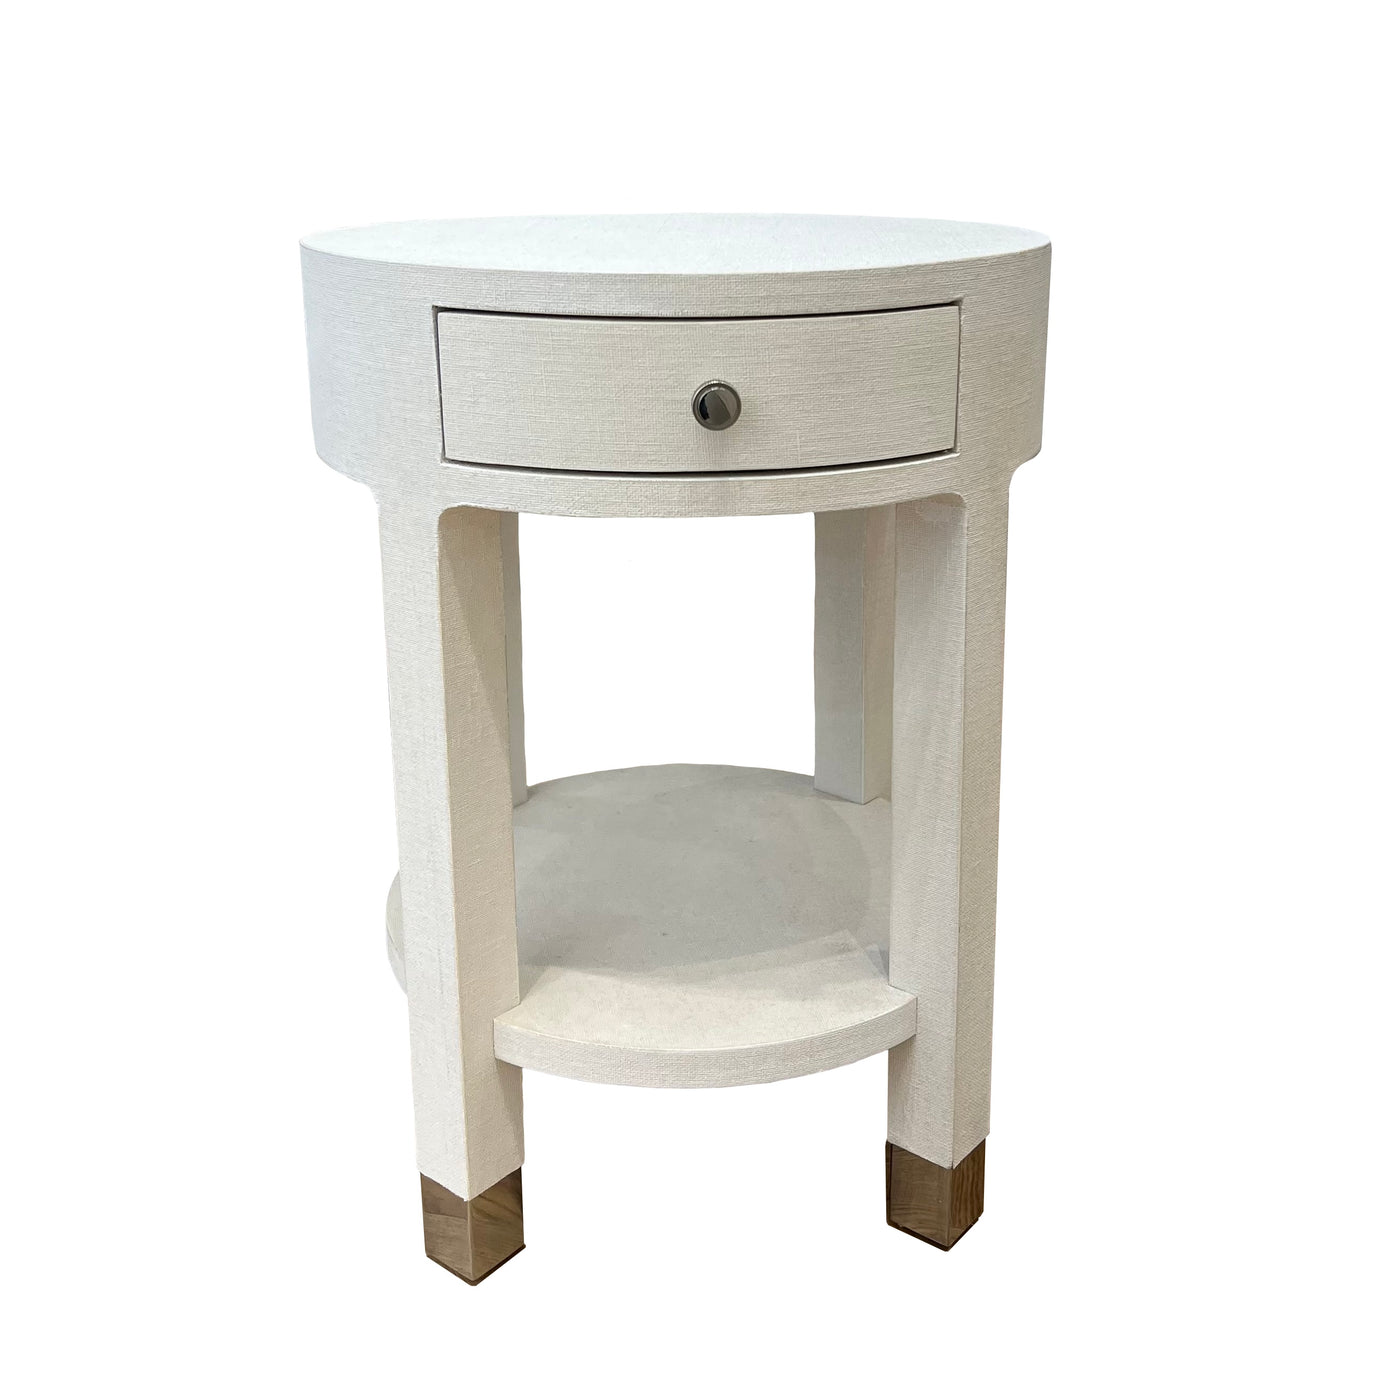 SIDE TABLE 1-DRAWER ROUND WHITE LINEN